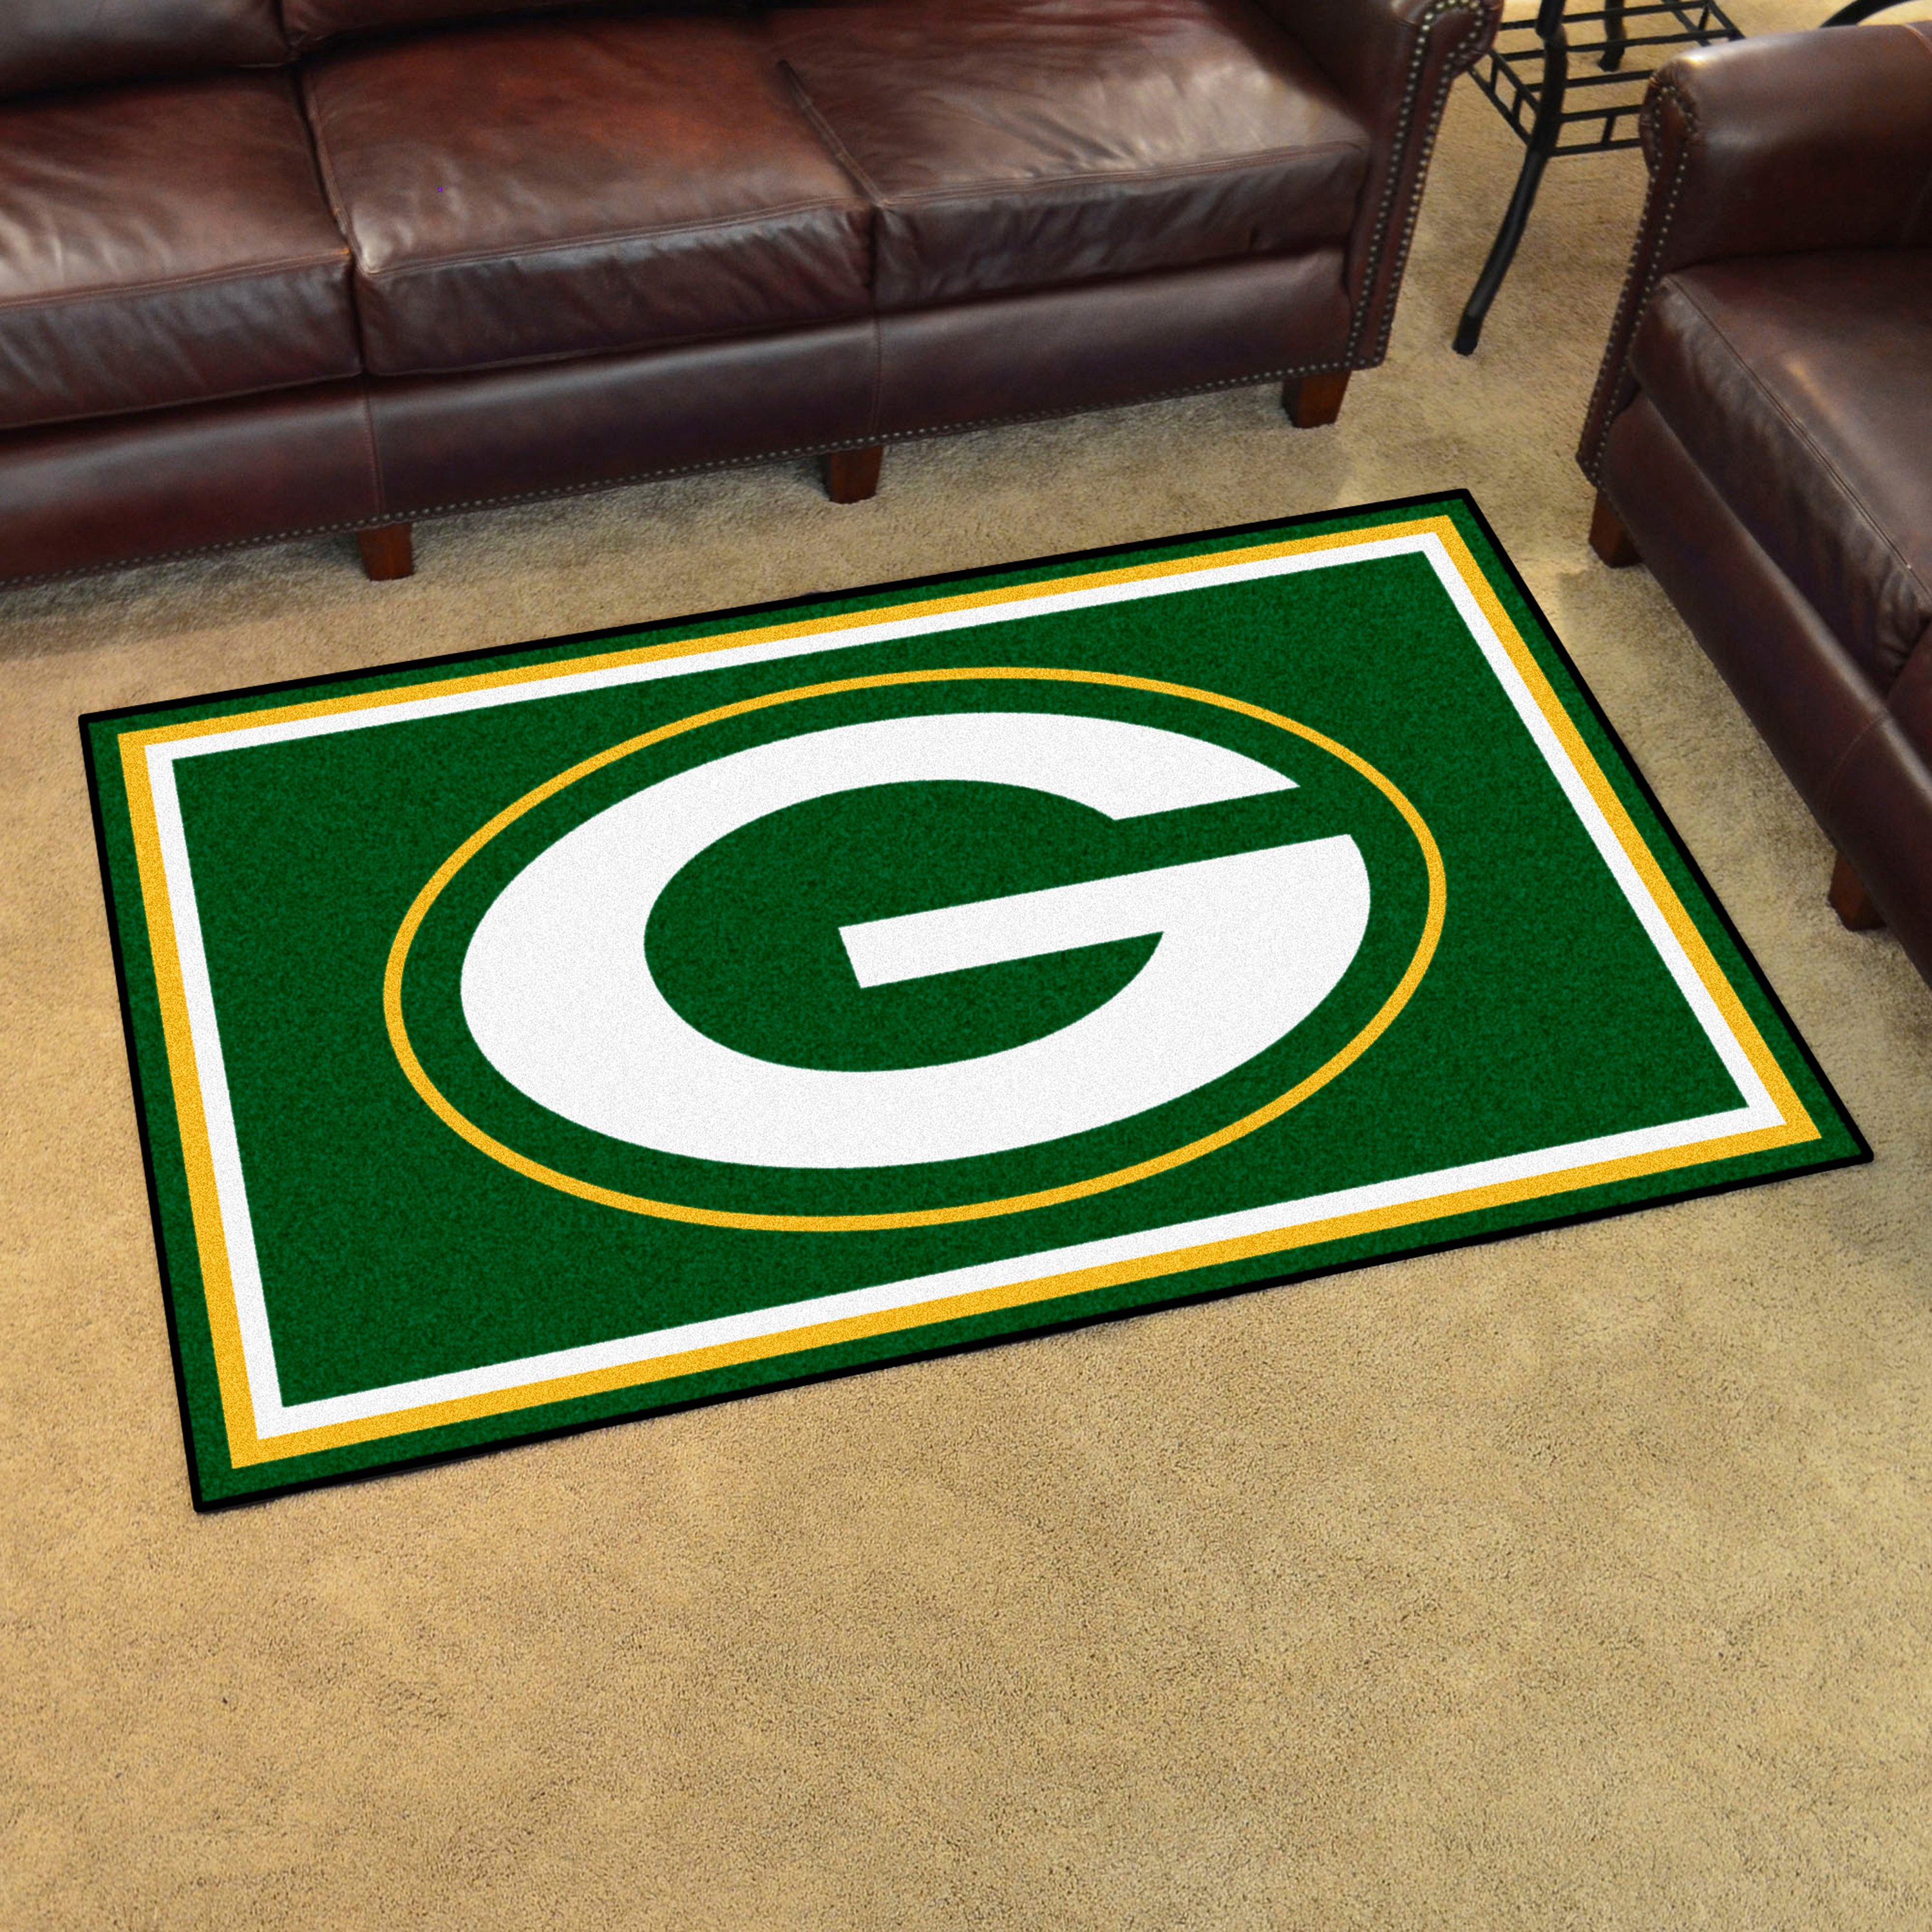 Fanmats® 6577 Green Bay Packers 48 X 72 Nylon Face Ultra Plush Floor Rug With Oval G Logo